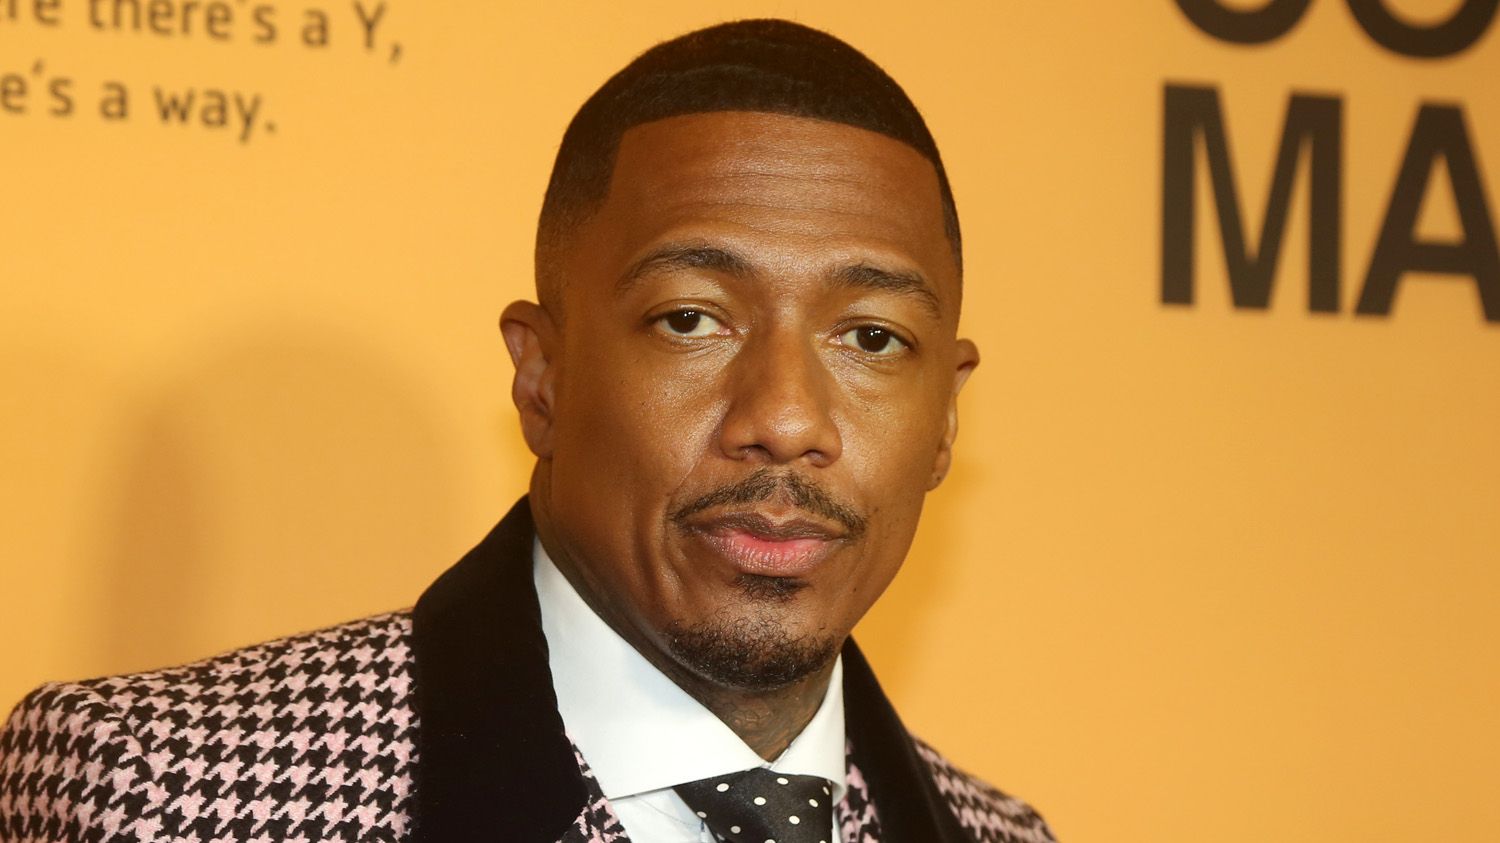 Nick Cannon And Zeus Network Face Backlash For Dark Skin Vs. Light Skin Competition